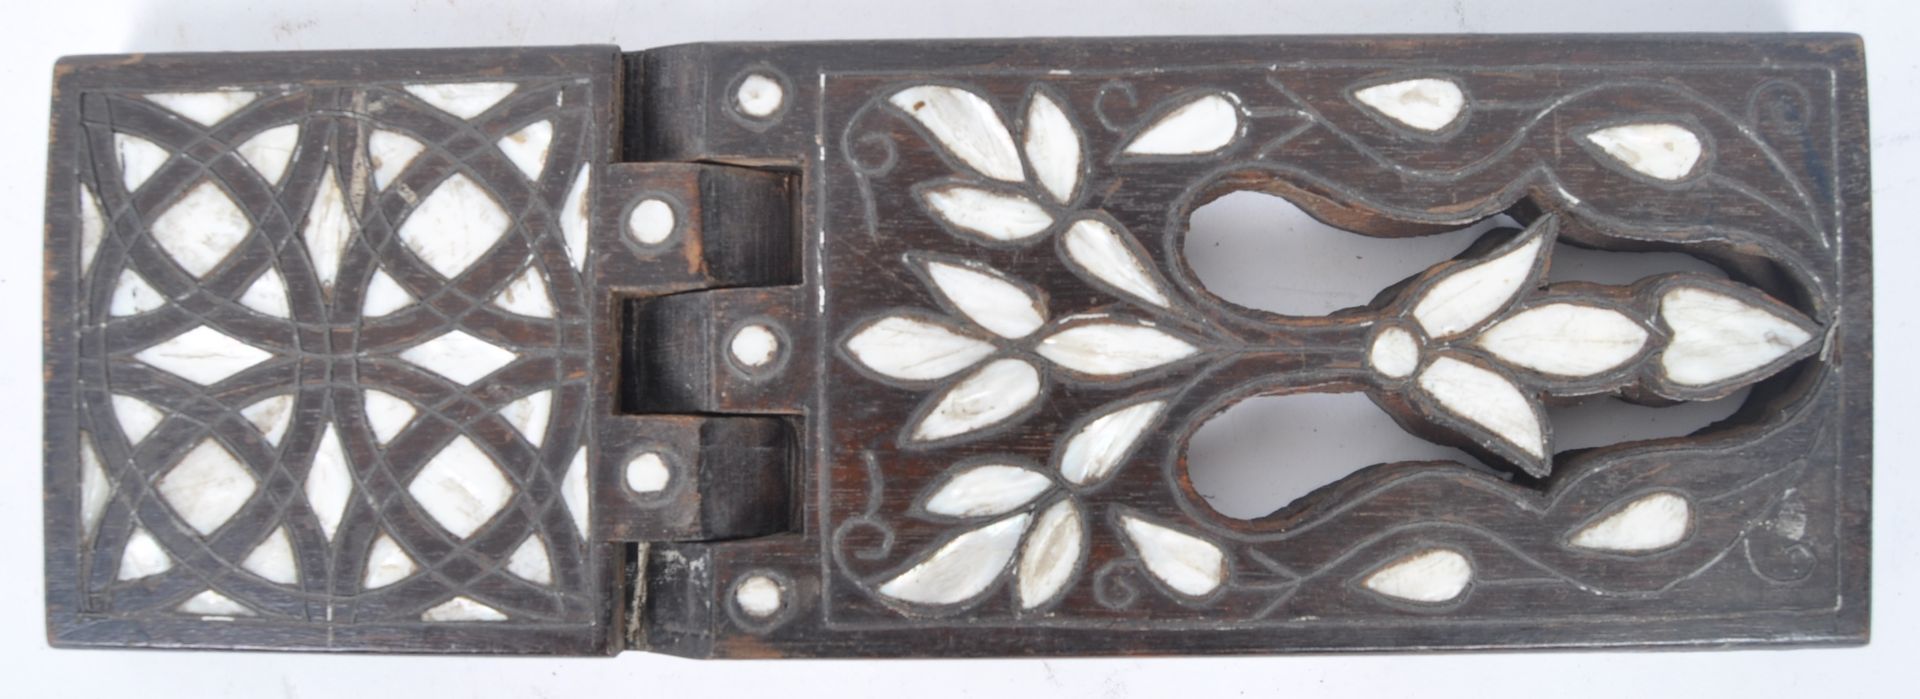 19TH CENTURY ISLAMIC MOTHER OF PEARL FOLDING QURAN STAND - Image 6 of 7